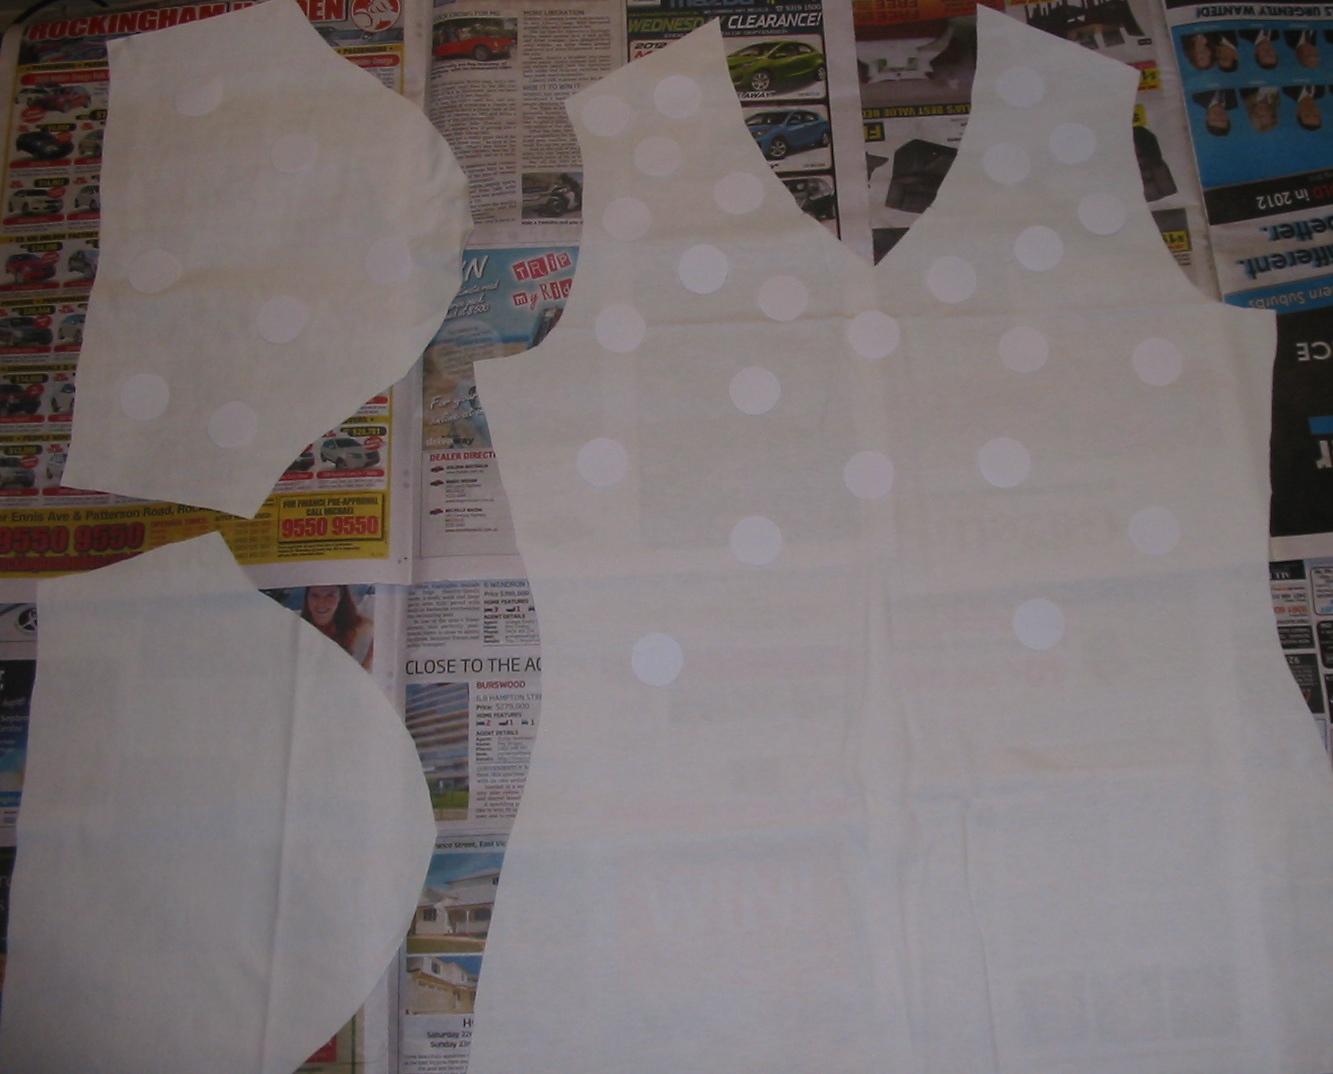 ... paper you could iron the circles on to your fabric before dyeing